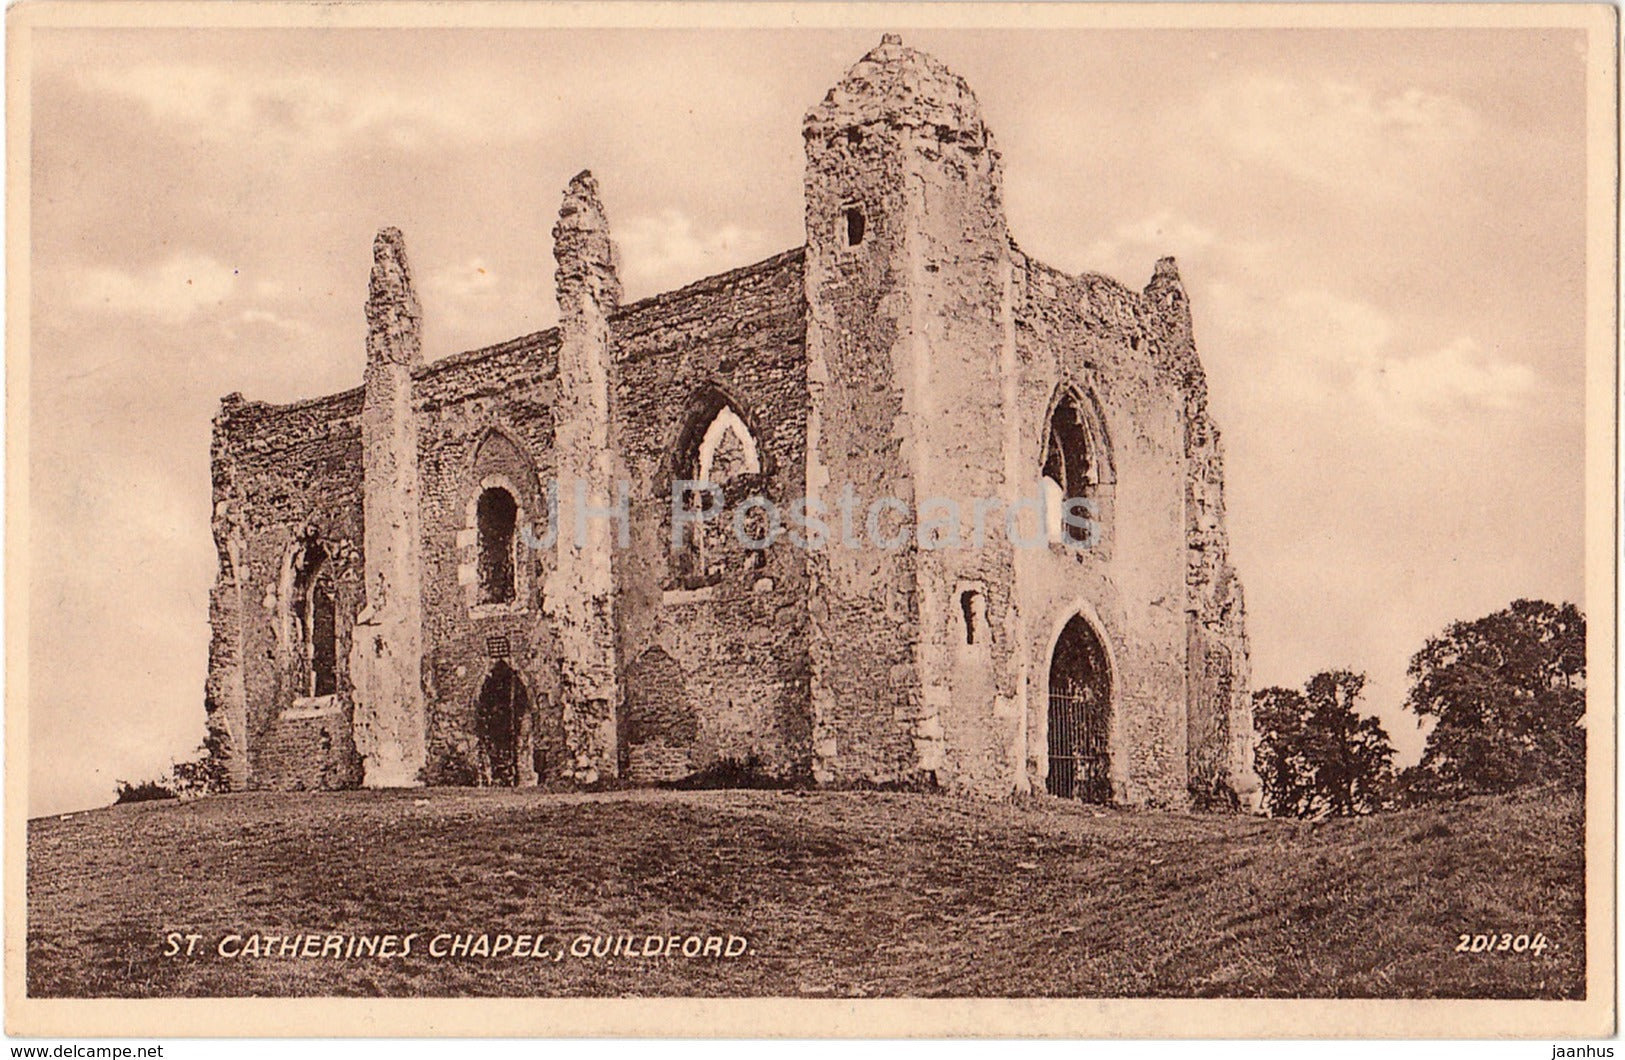 Guildford - St. Catherines Chapel - 201304 - Sepiatype - 1952 - United Kingdom - England - used - JH Postcards